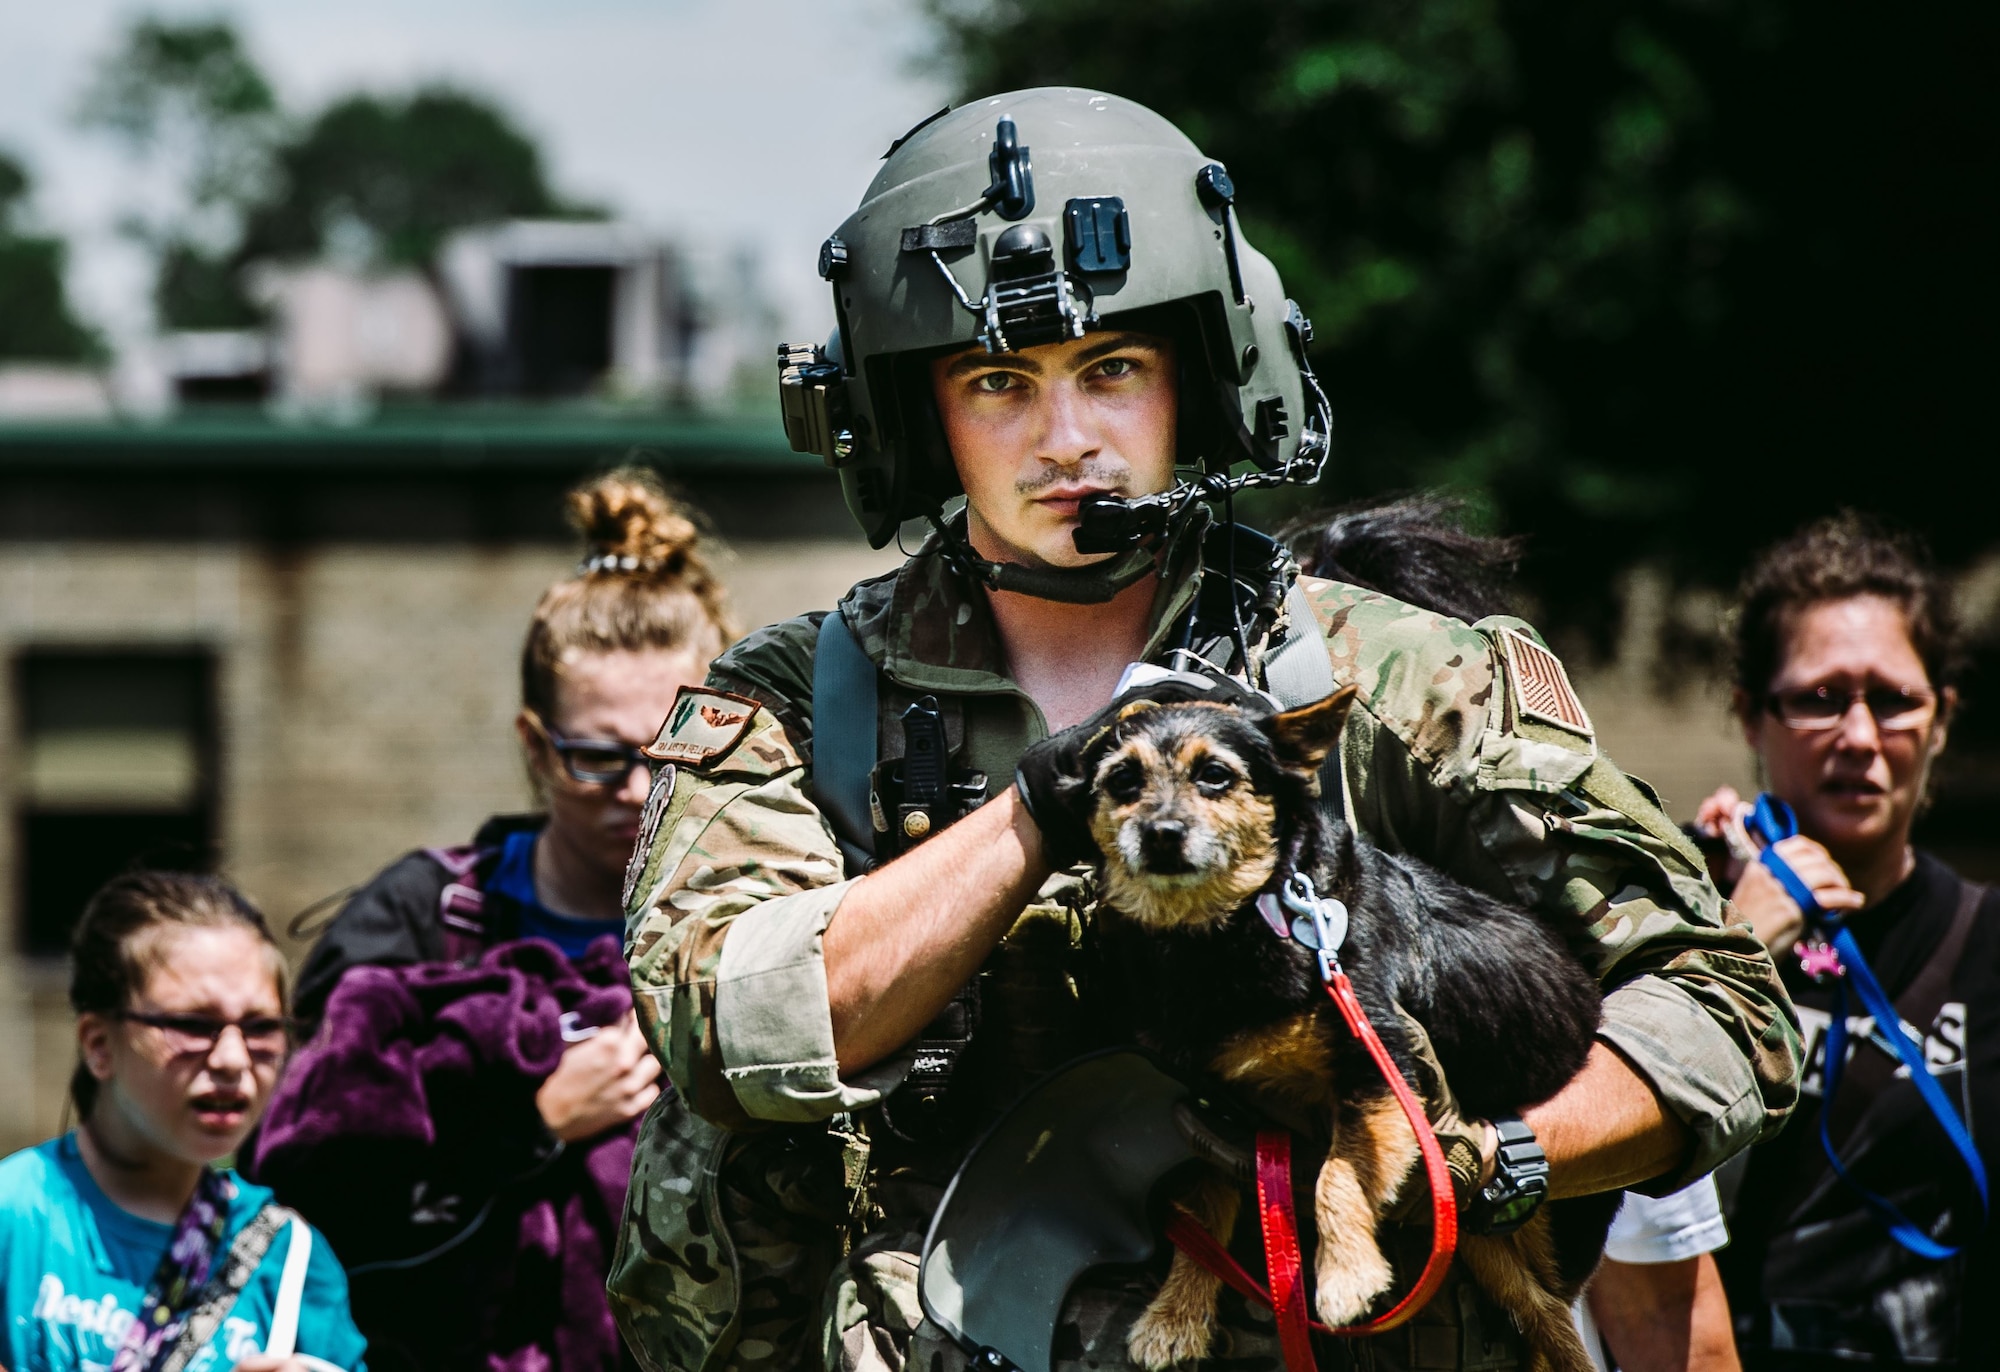 Senior Airman Austin Hellweg, 129th Rescue Squadron special missions aviator, carries a dog and leads a family into an HH-60 Pavehawk for extraction to a safer location during the relief effort for Hurricane Harvey, Aug. 31st, 2017, Beaumont, Texas. The relief efforts have a conglomerate of active, guard and reserve units from all branches aiding the federal government to help Texas recover from Hurricane Harvey. (U.S. Air Force photo by Staff Sgt. Jordan Castelan)